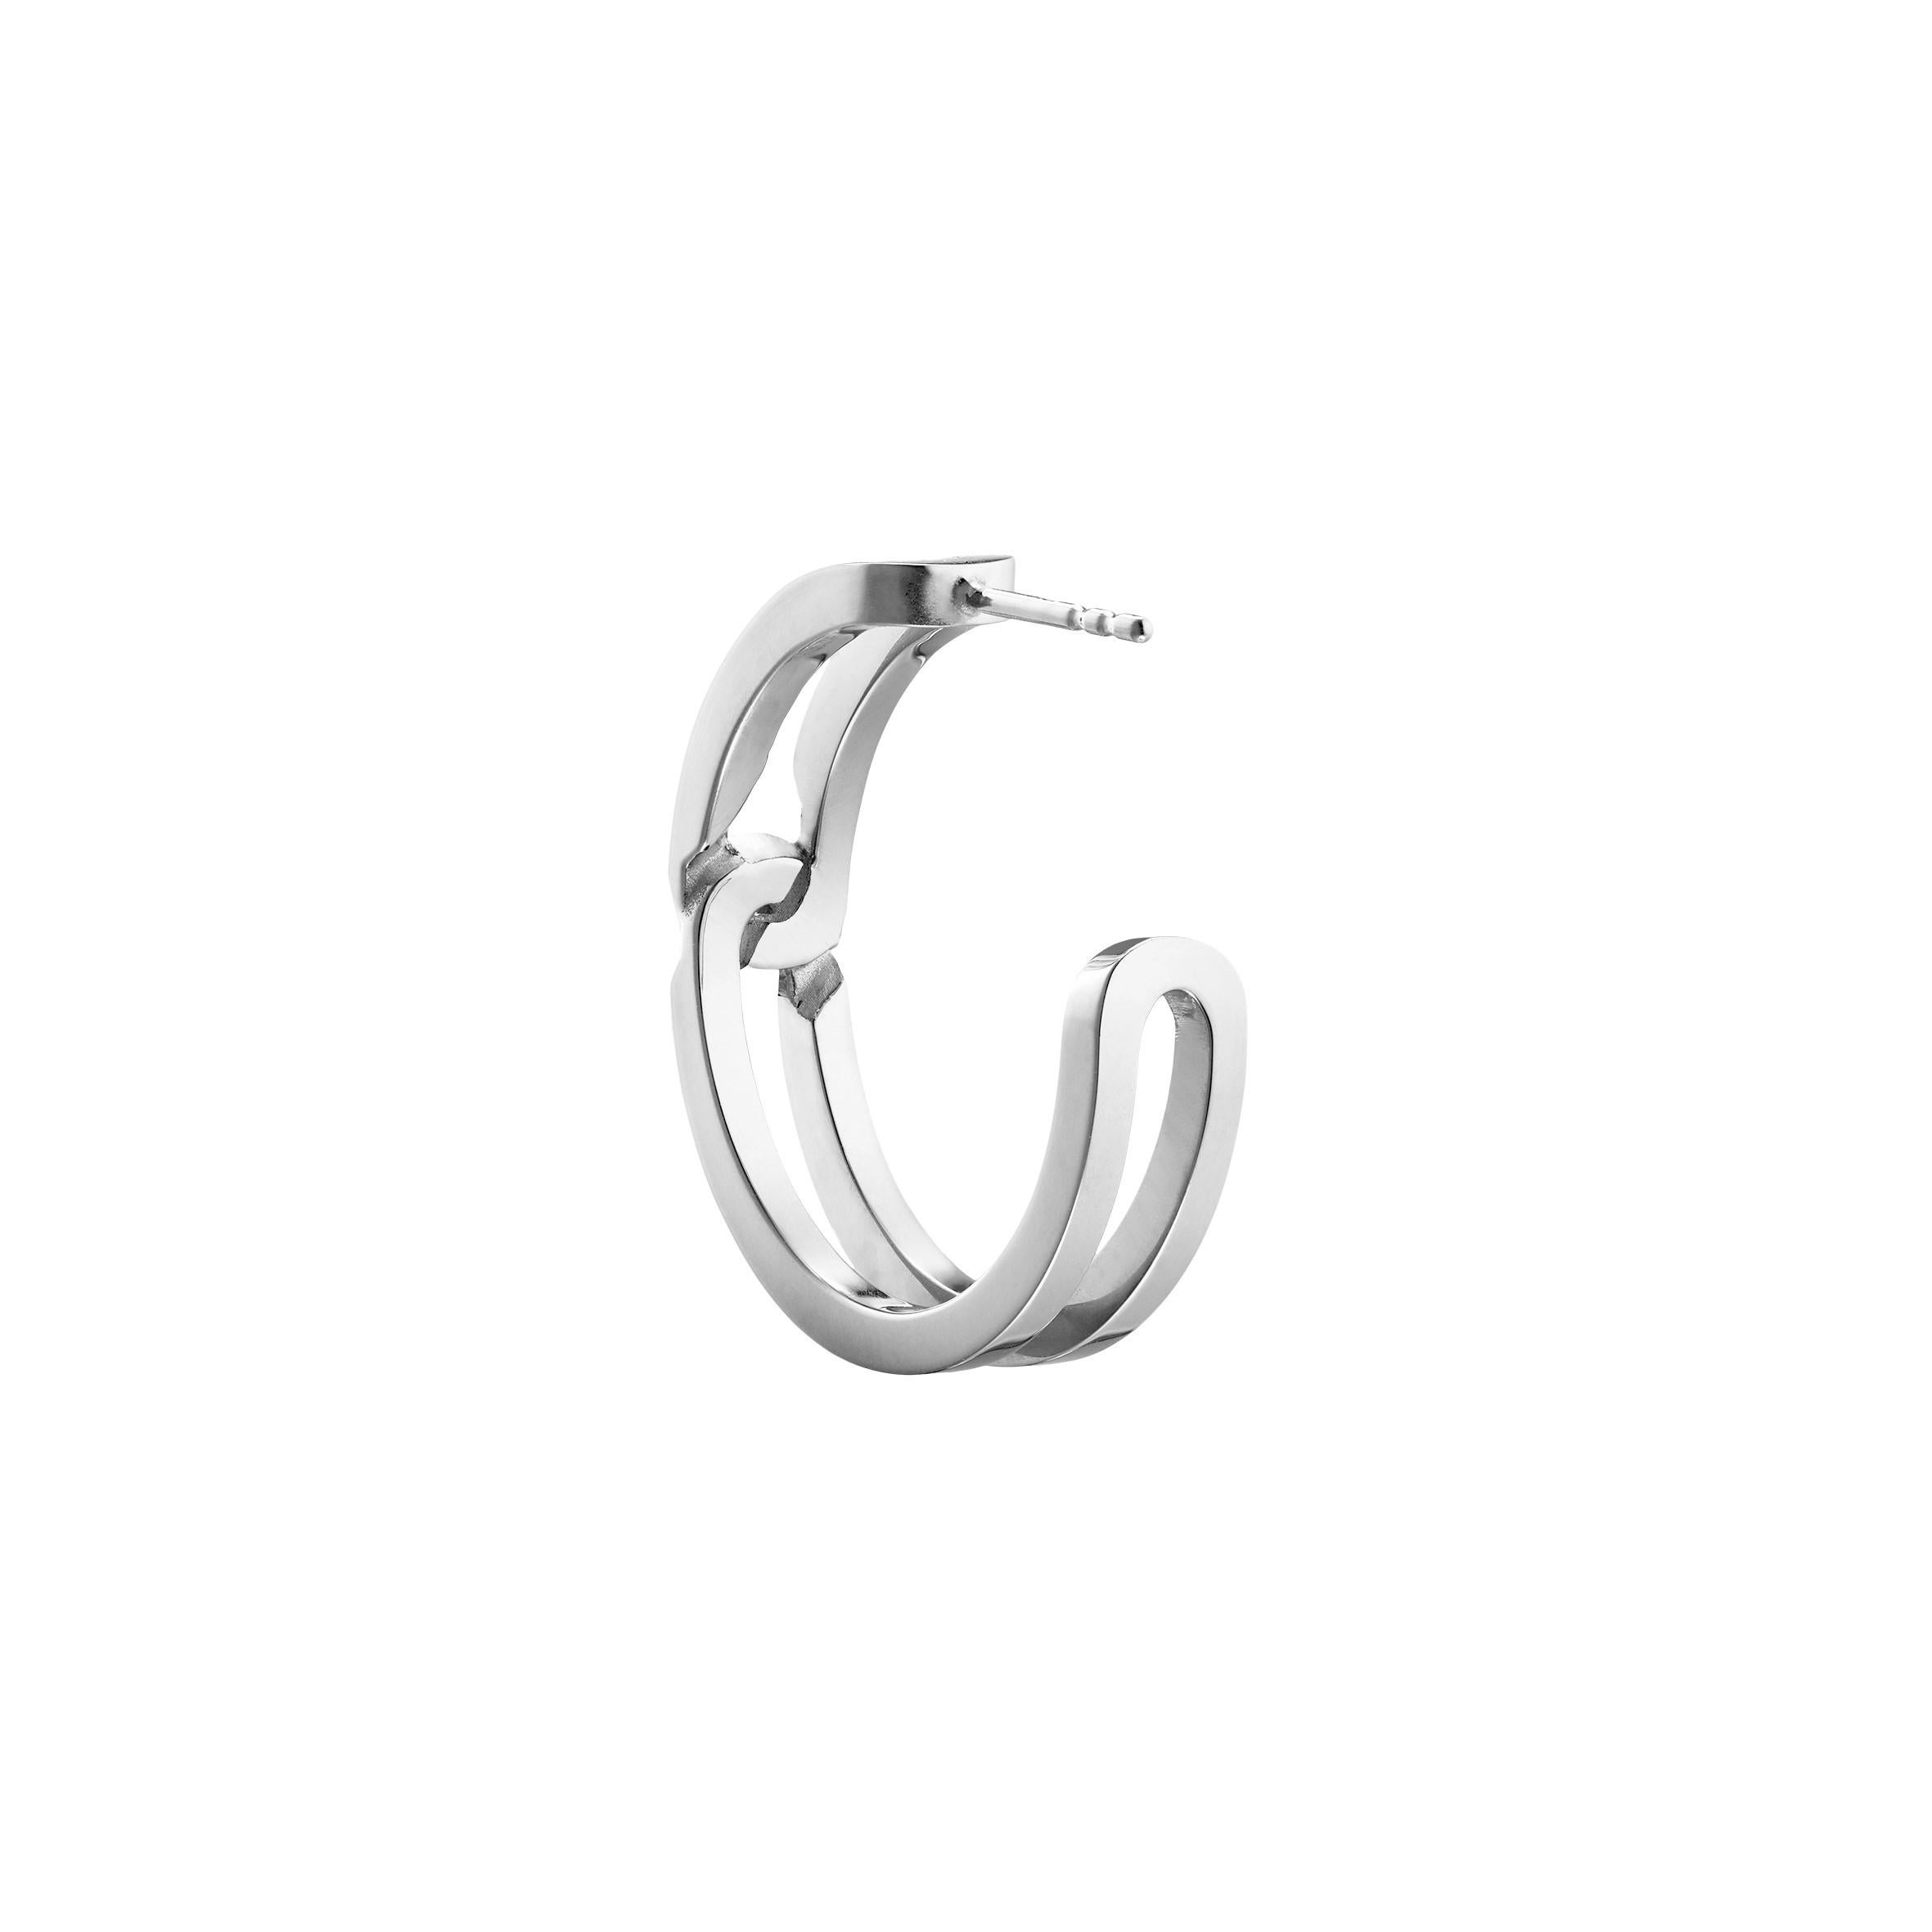 KINRADEN THE GASP LARGE Earring - sterling silver (a pair) For Sale 1